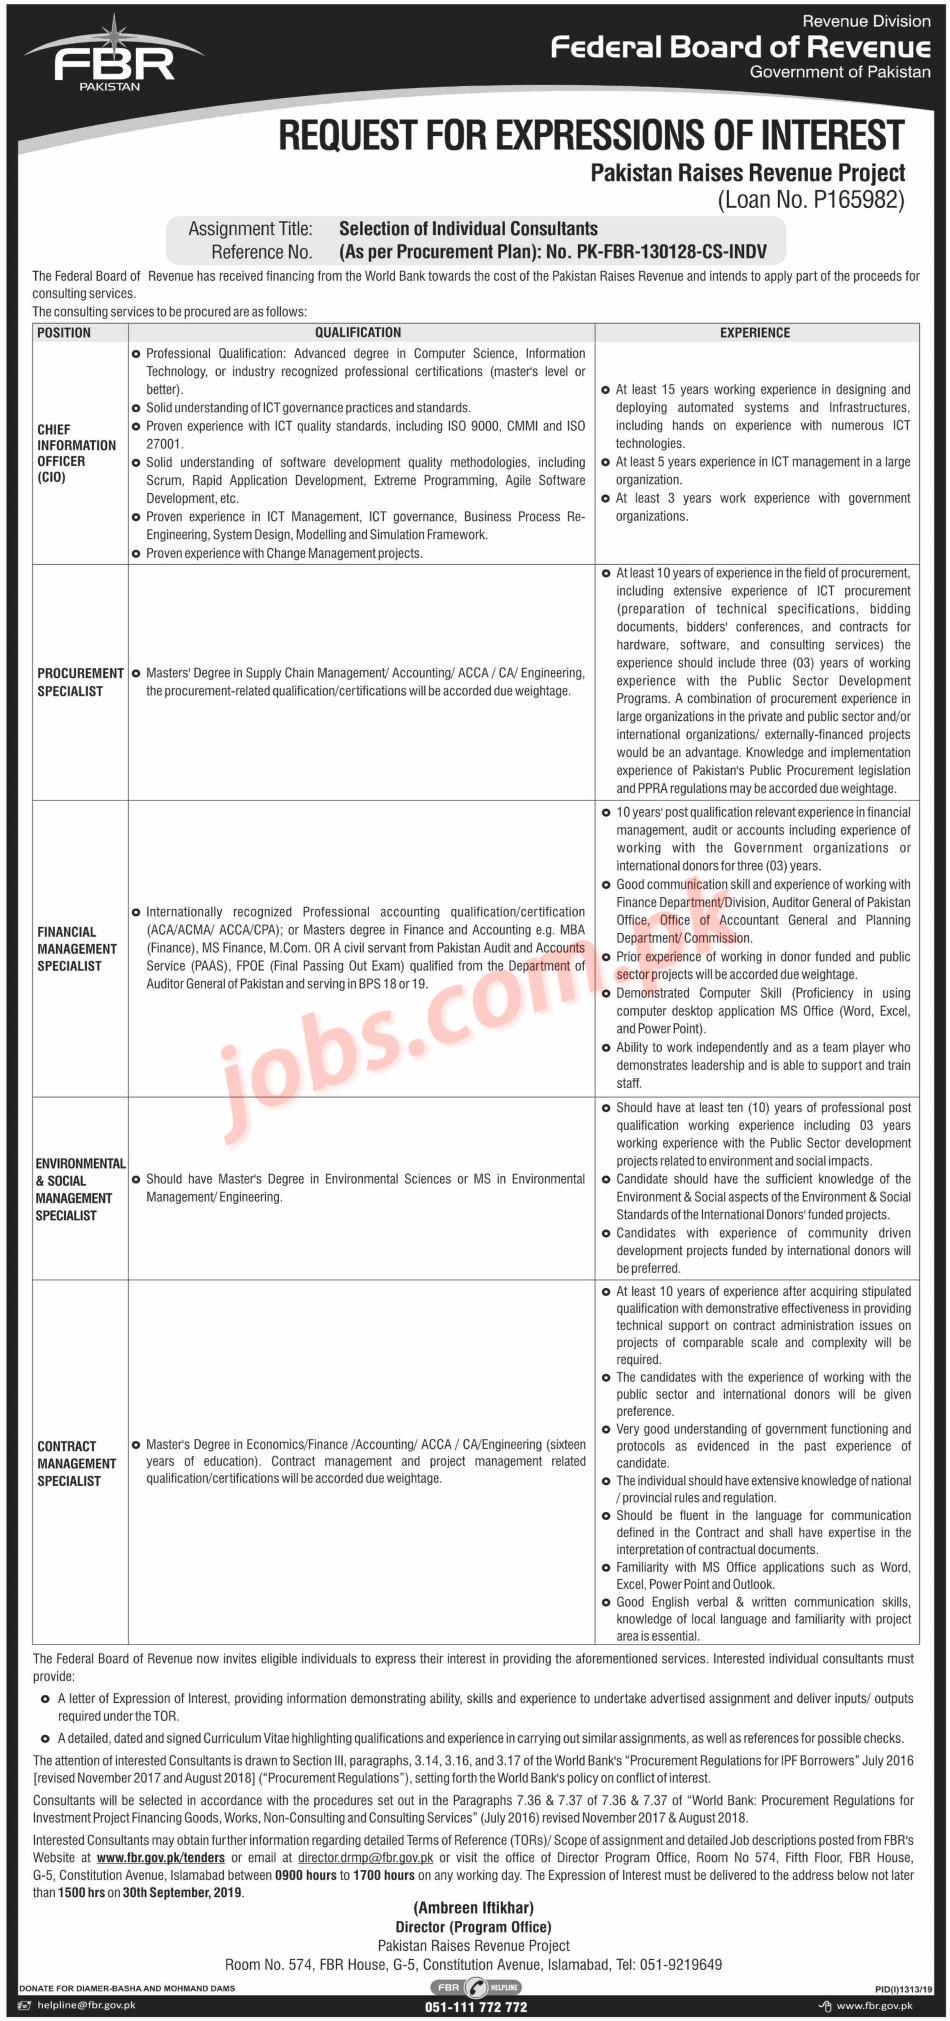 Federal Board of Revenue (FBR) Jobs 2019 for Specialists / Consultants